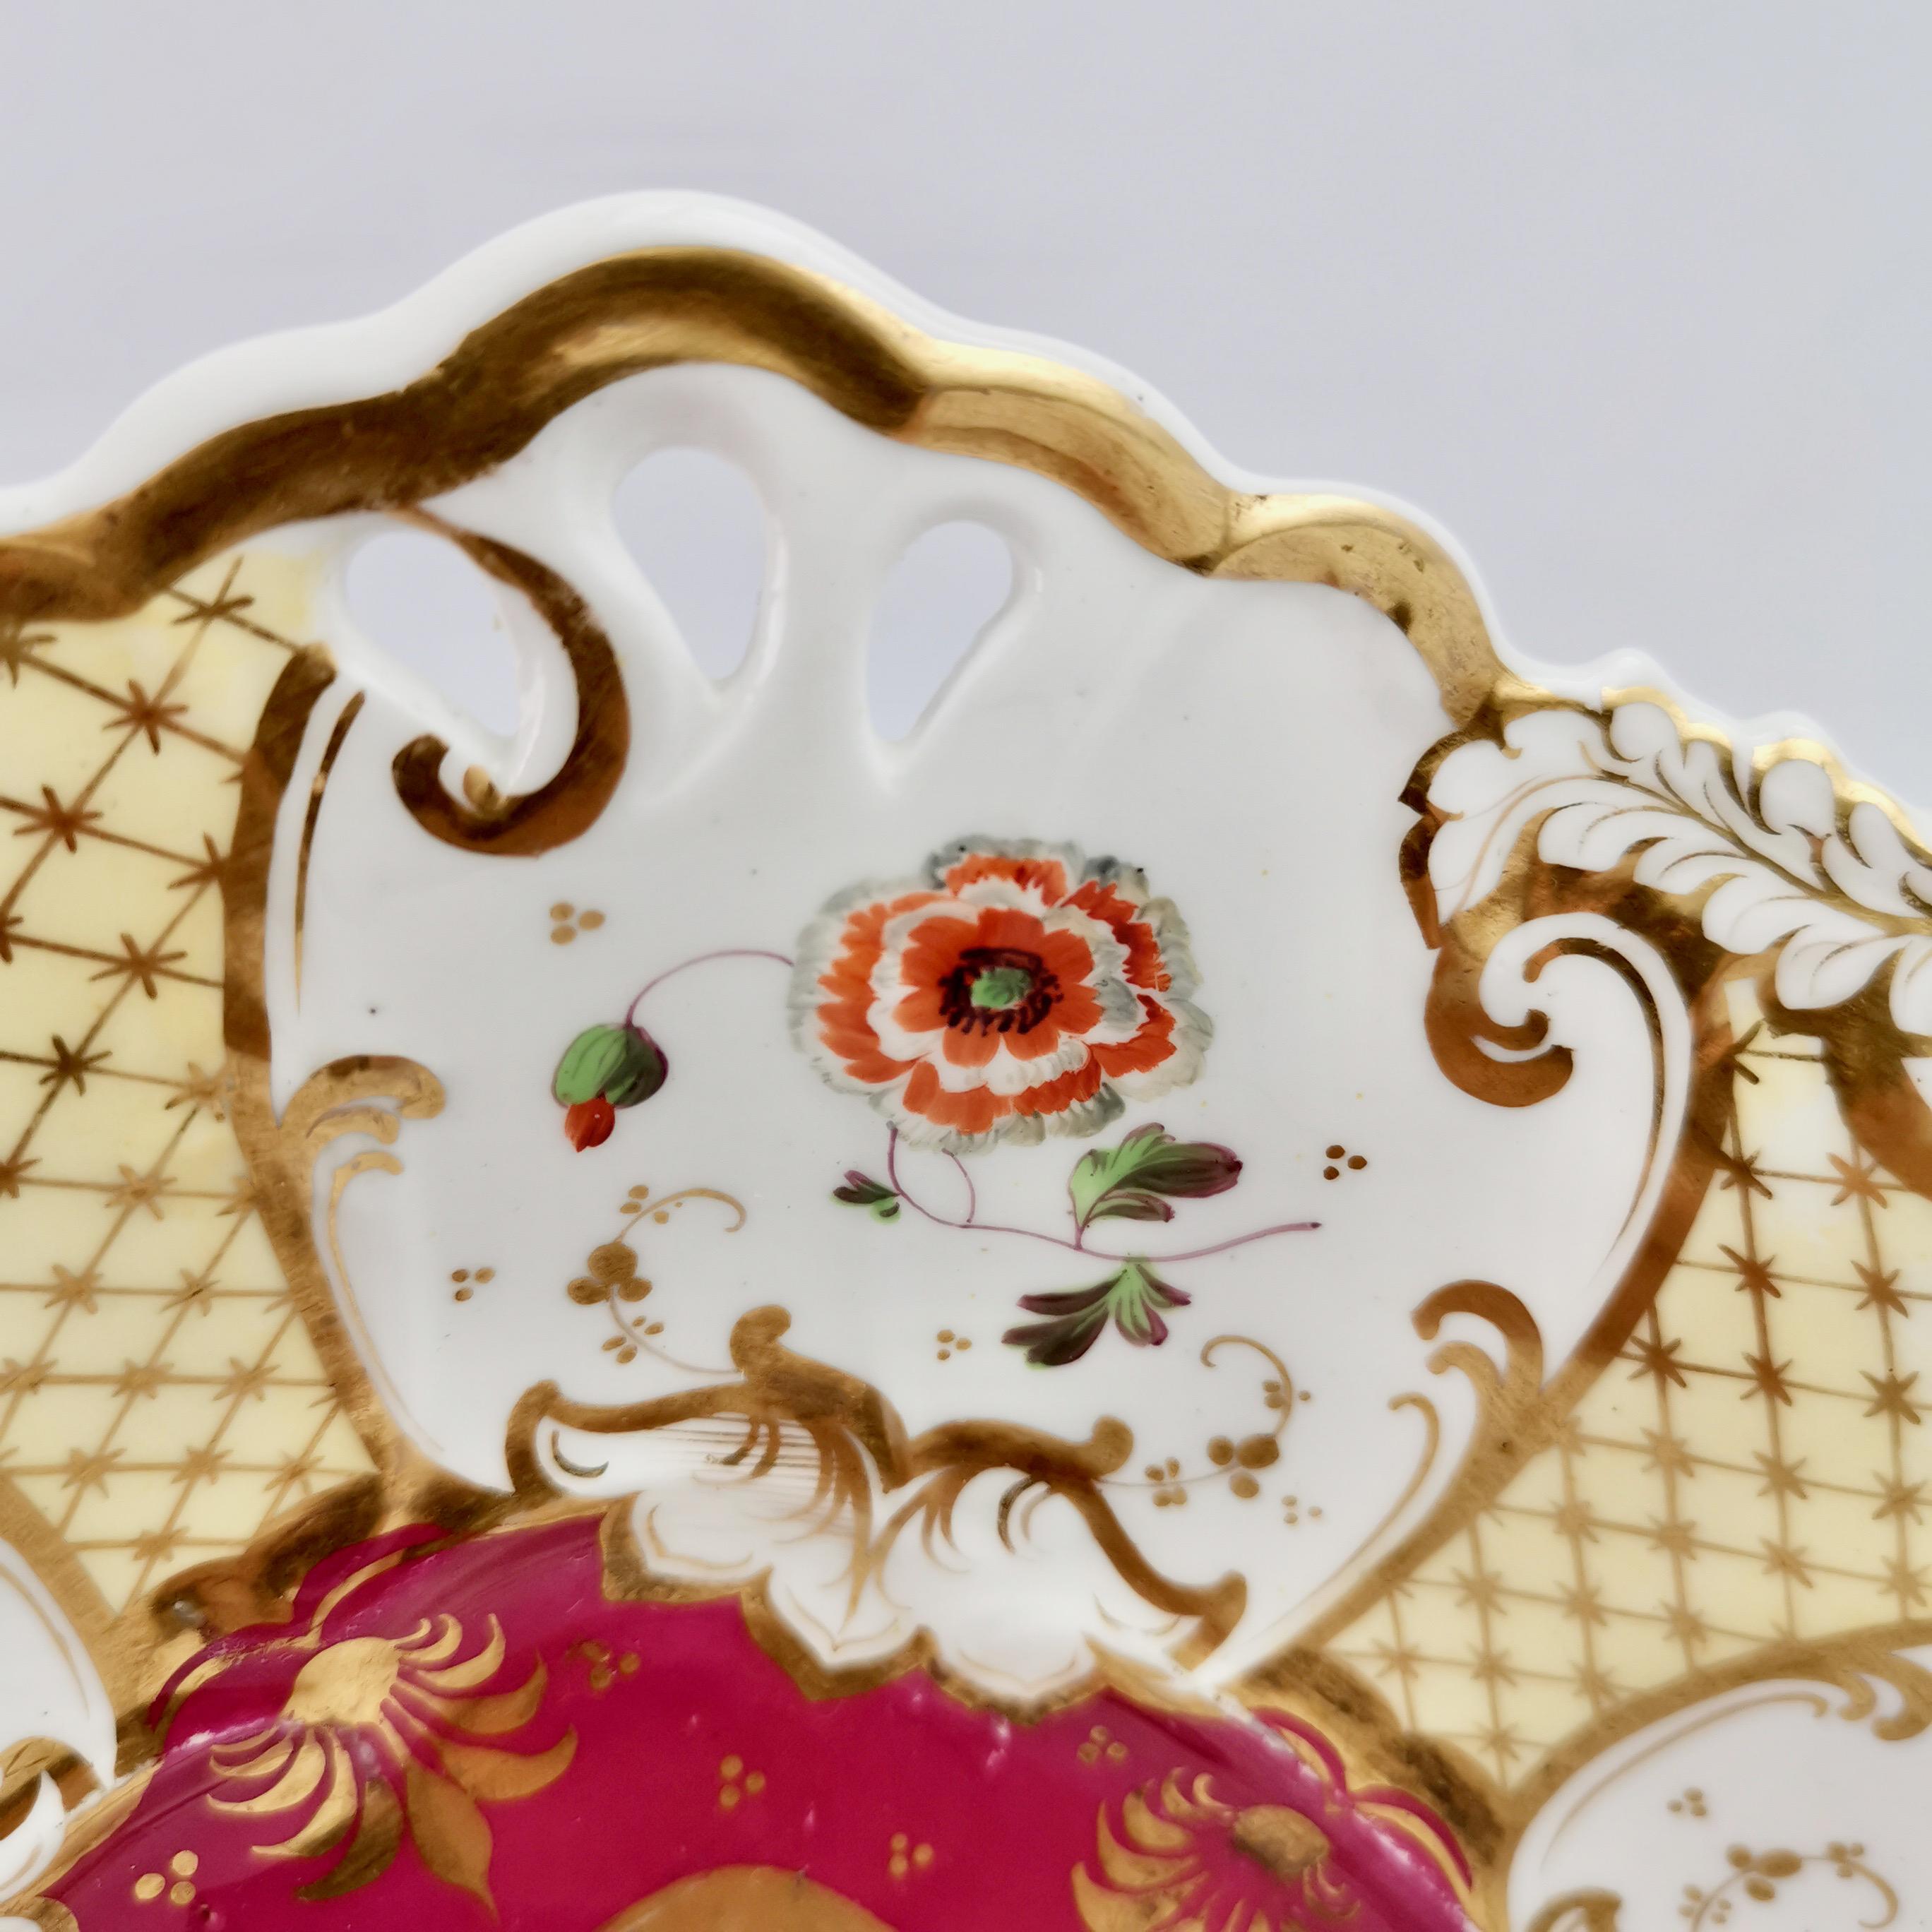 Samuel Alcock Porcelain Dish, Maroon, Gilt and Flowers, Rococo Revival, ca 1835 1